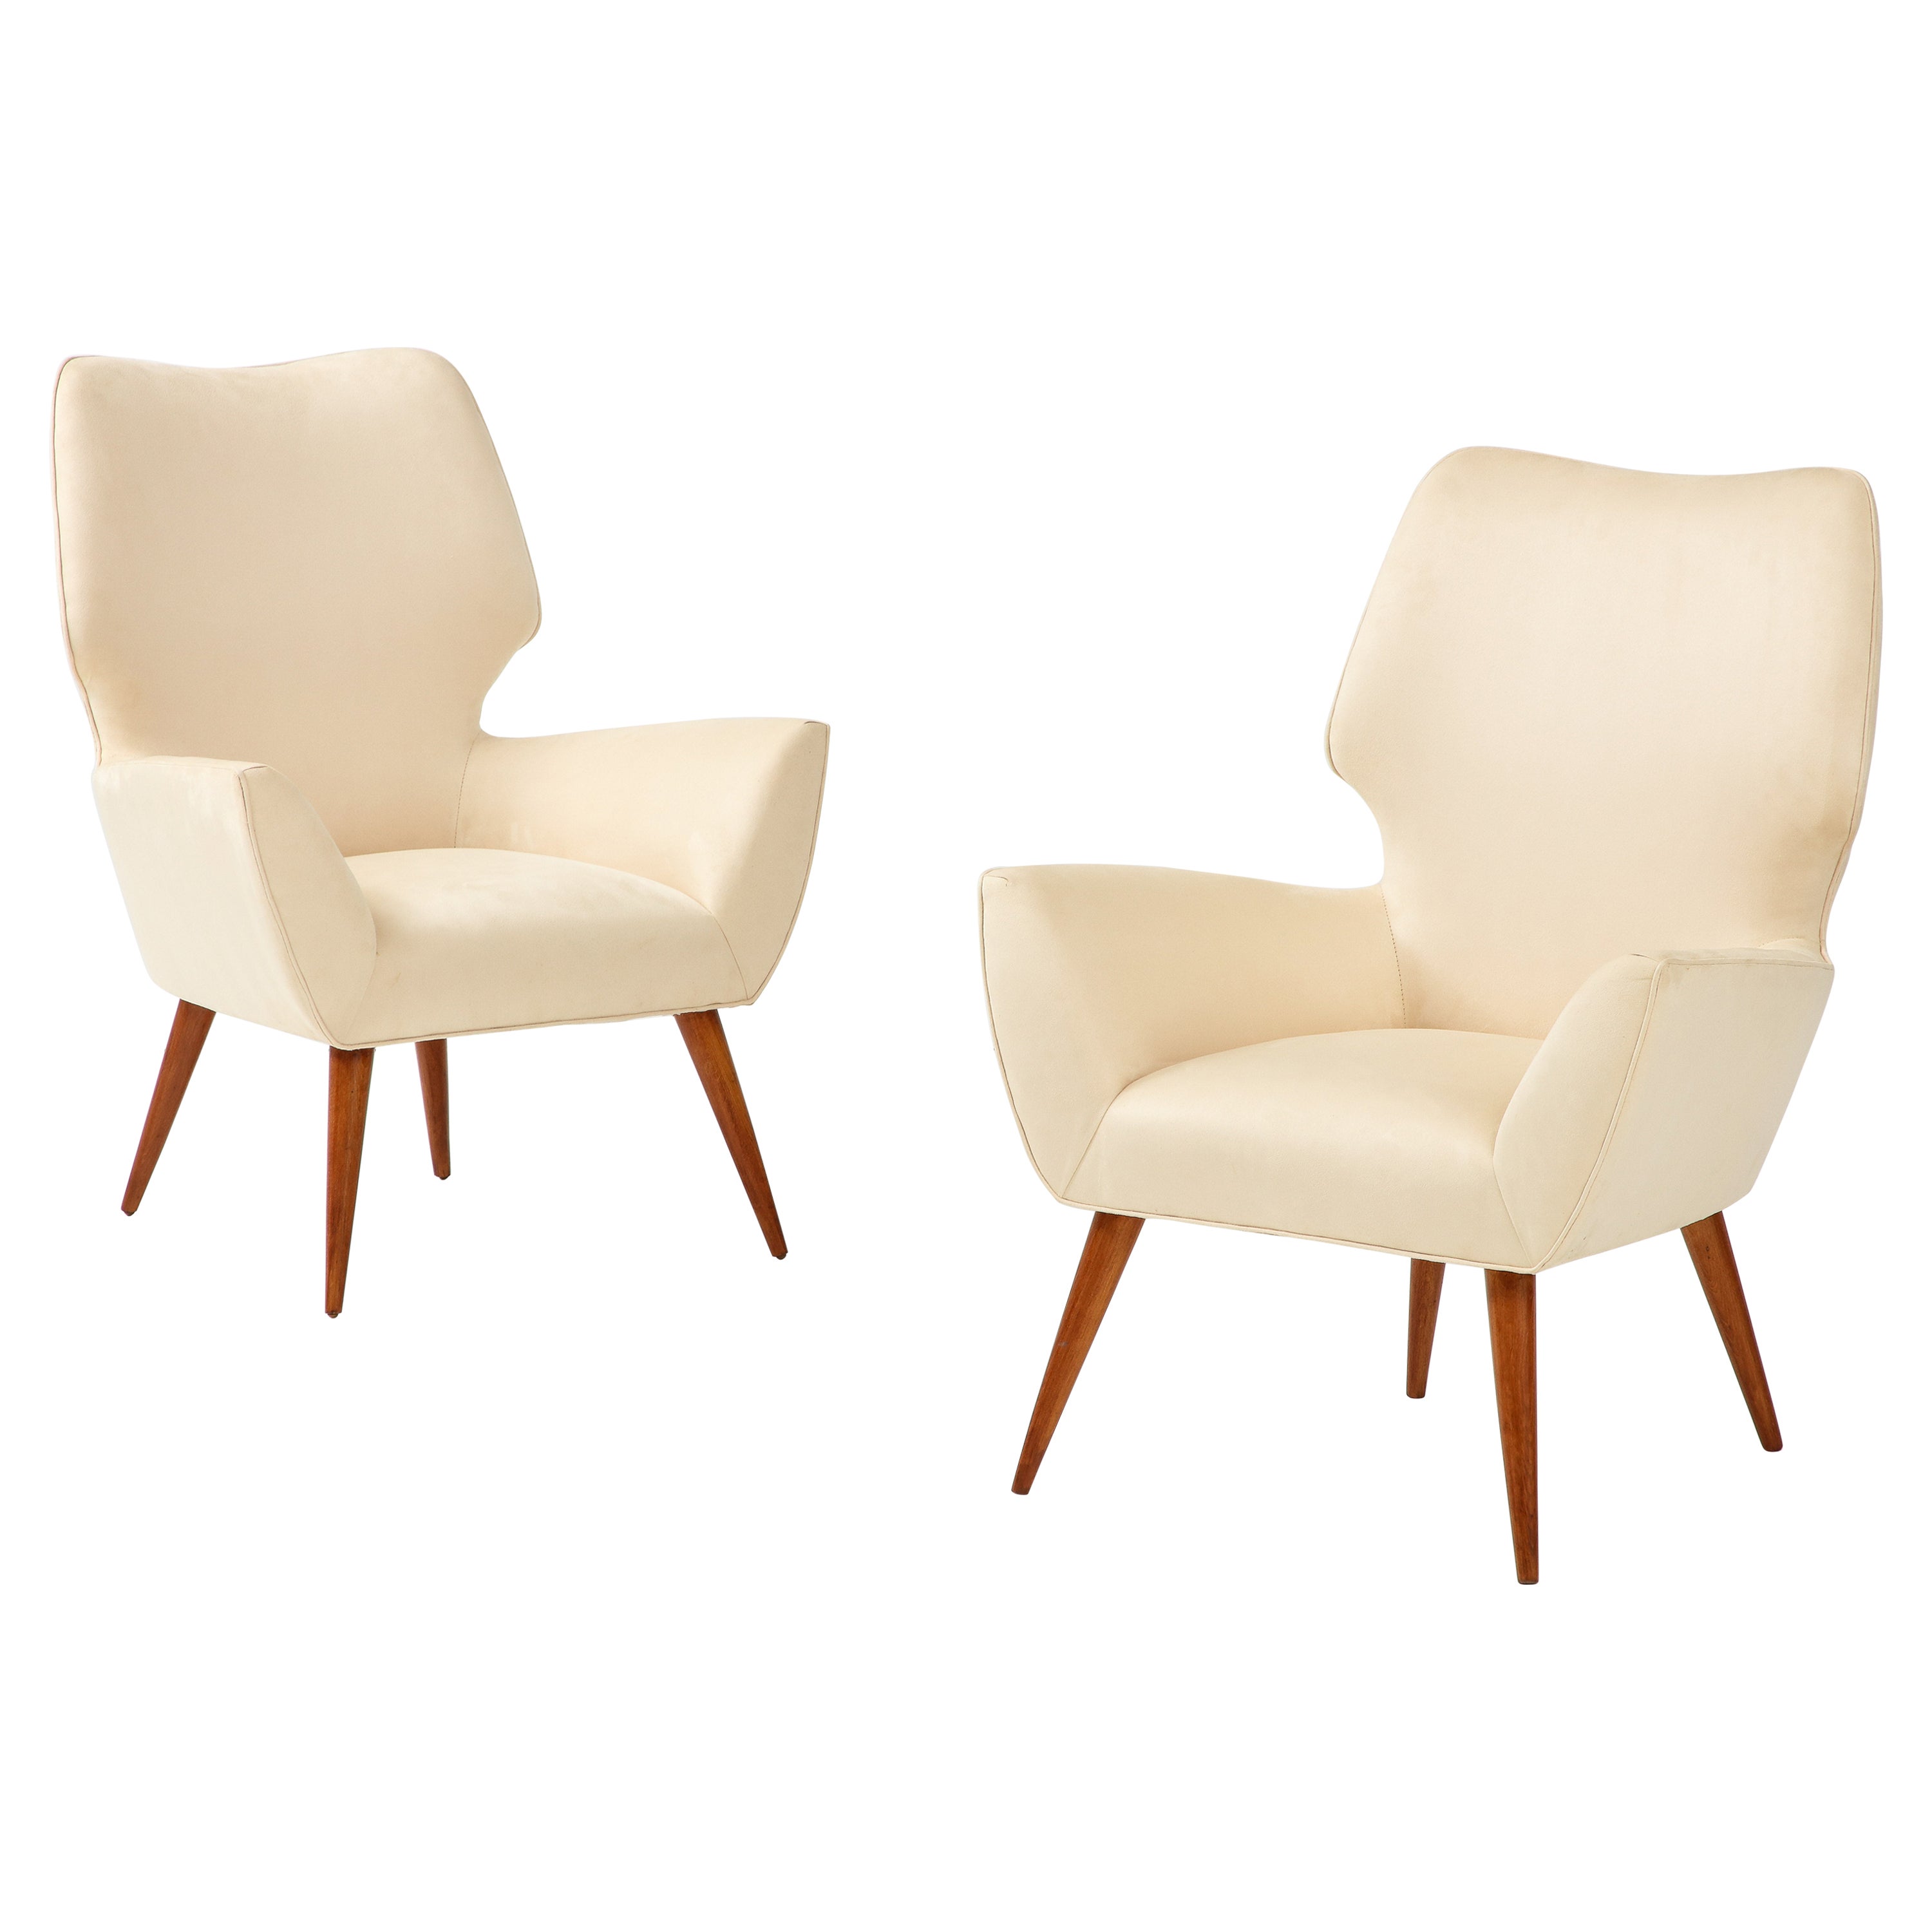 Pair of Italian Armchairs with Wood Legs, Italy, circa 1940